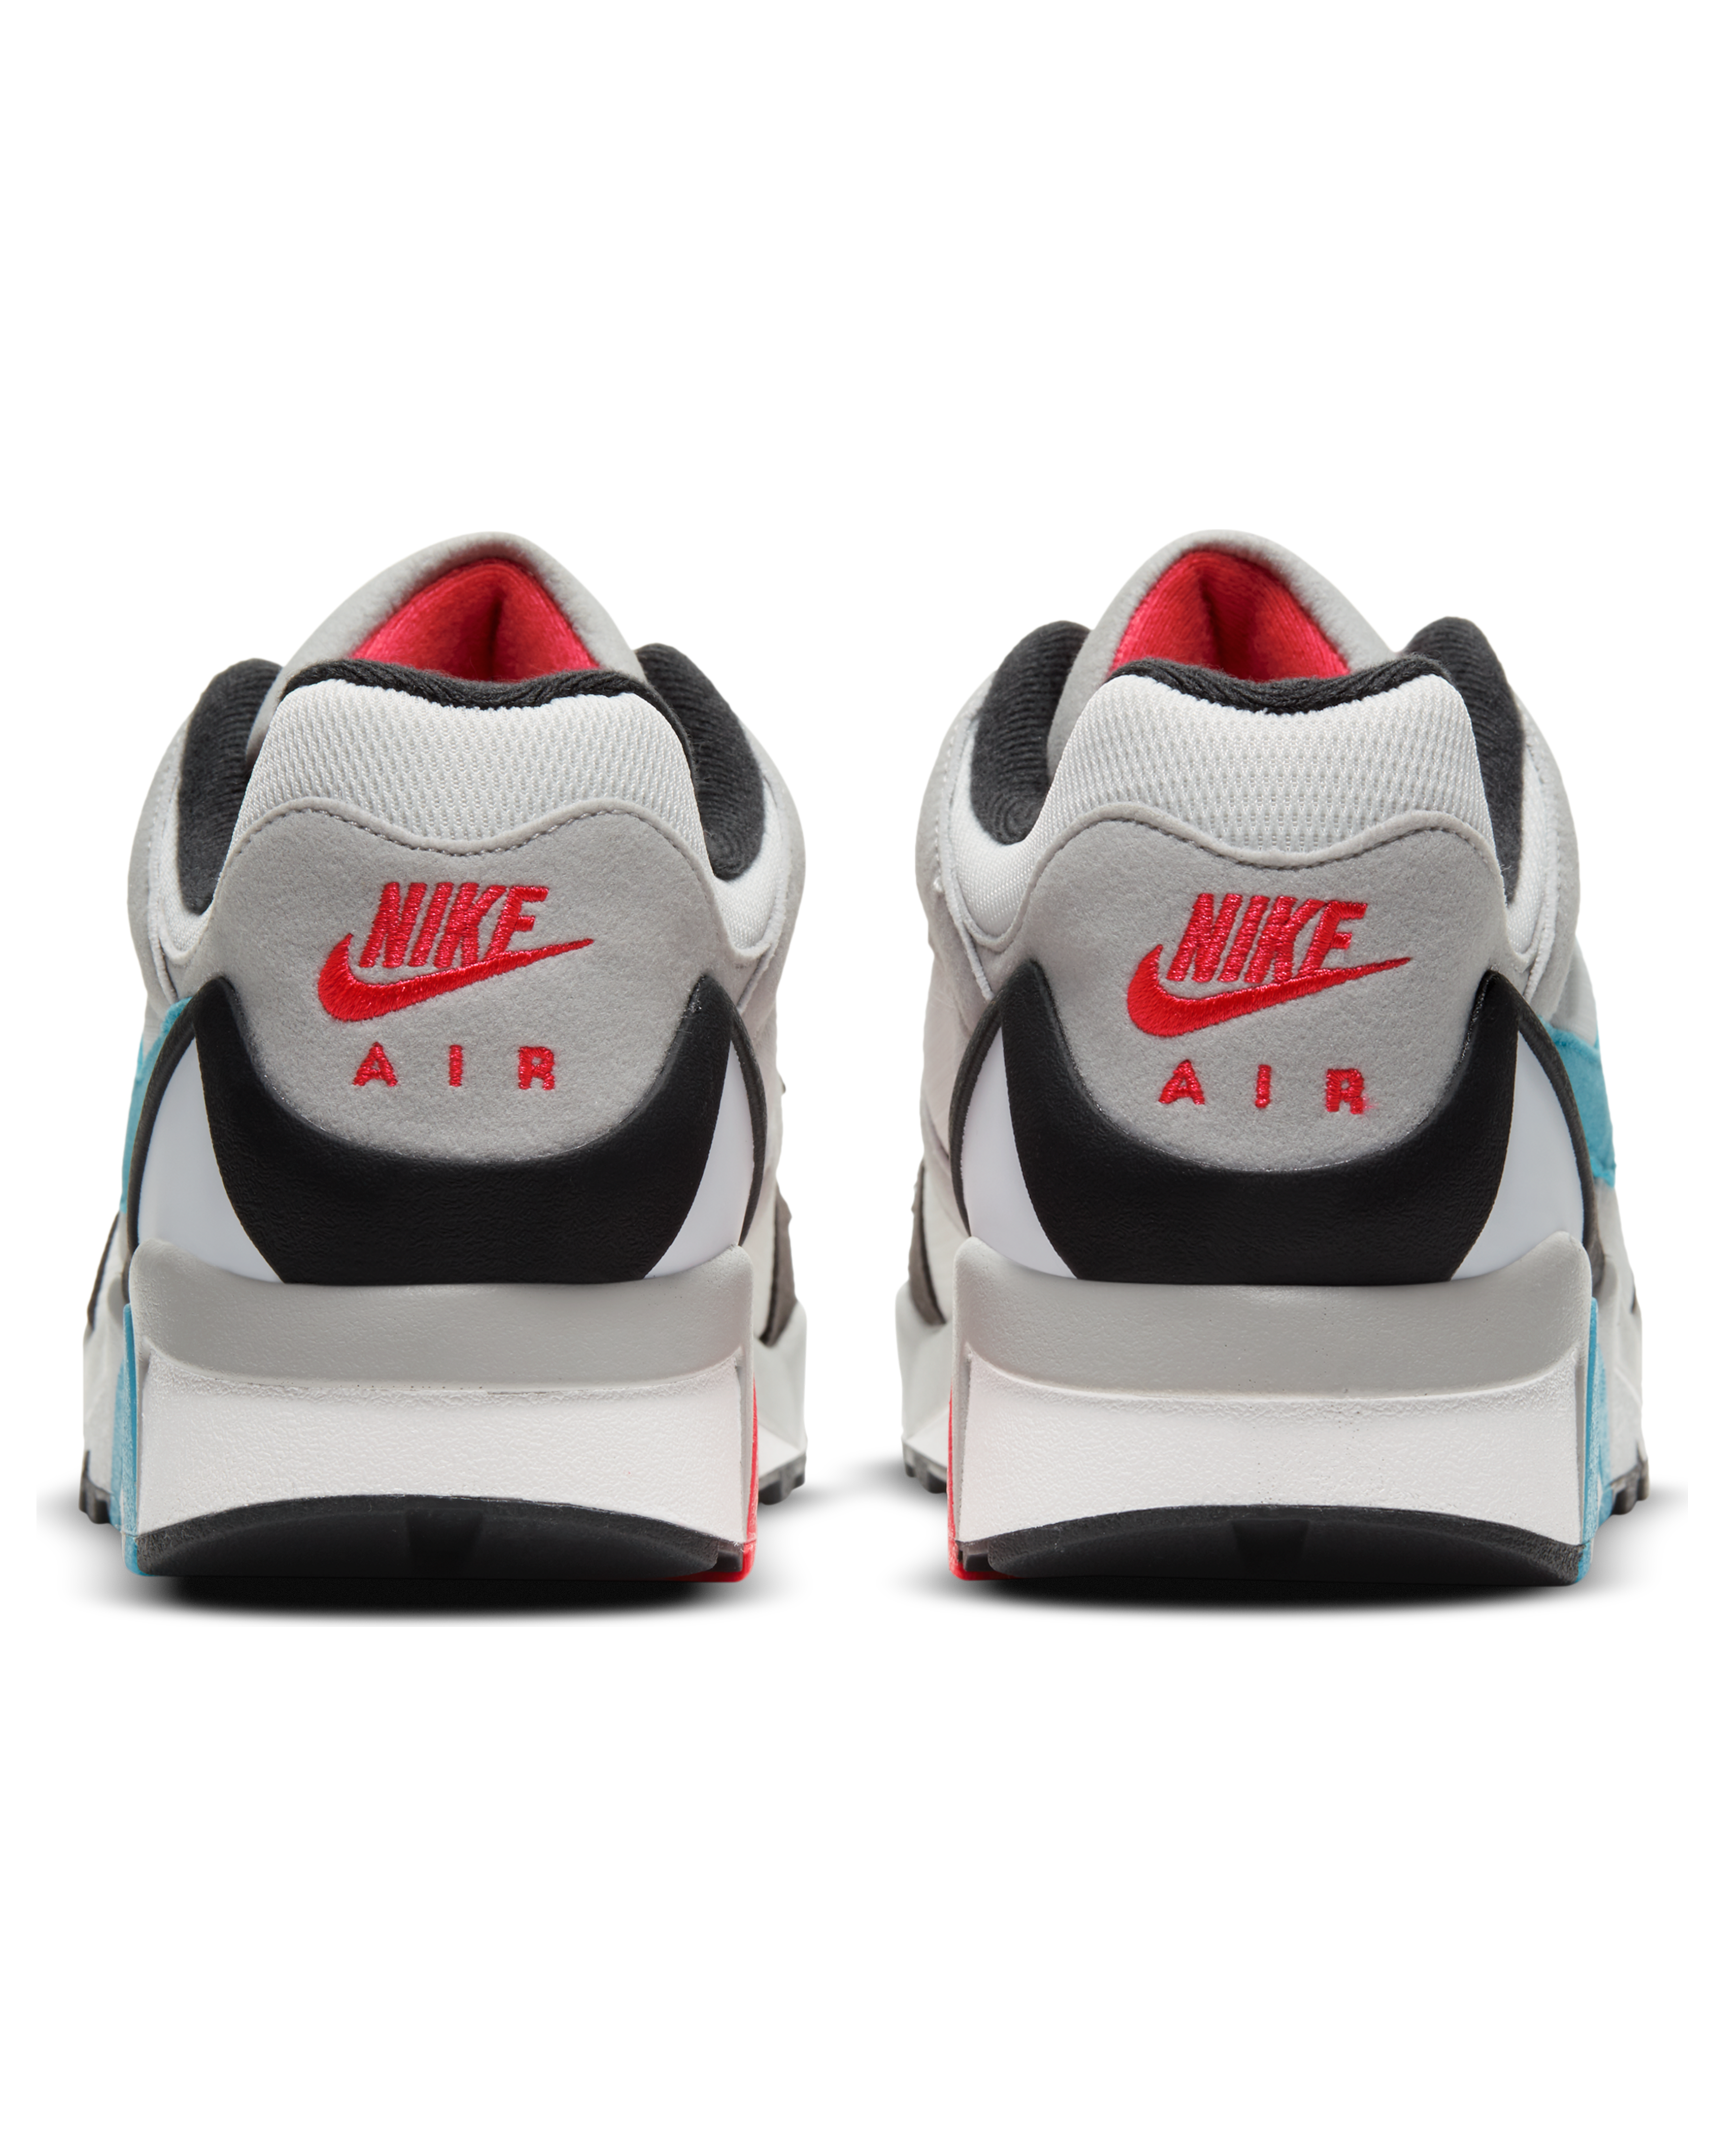 Nike Air Structure Triax '91 OG "NeoTeal"